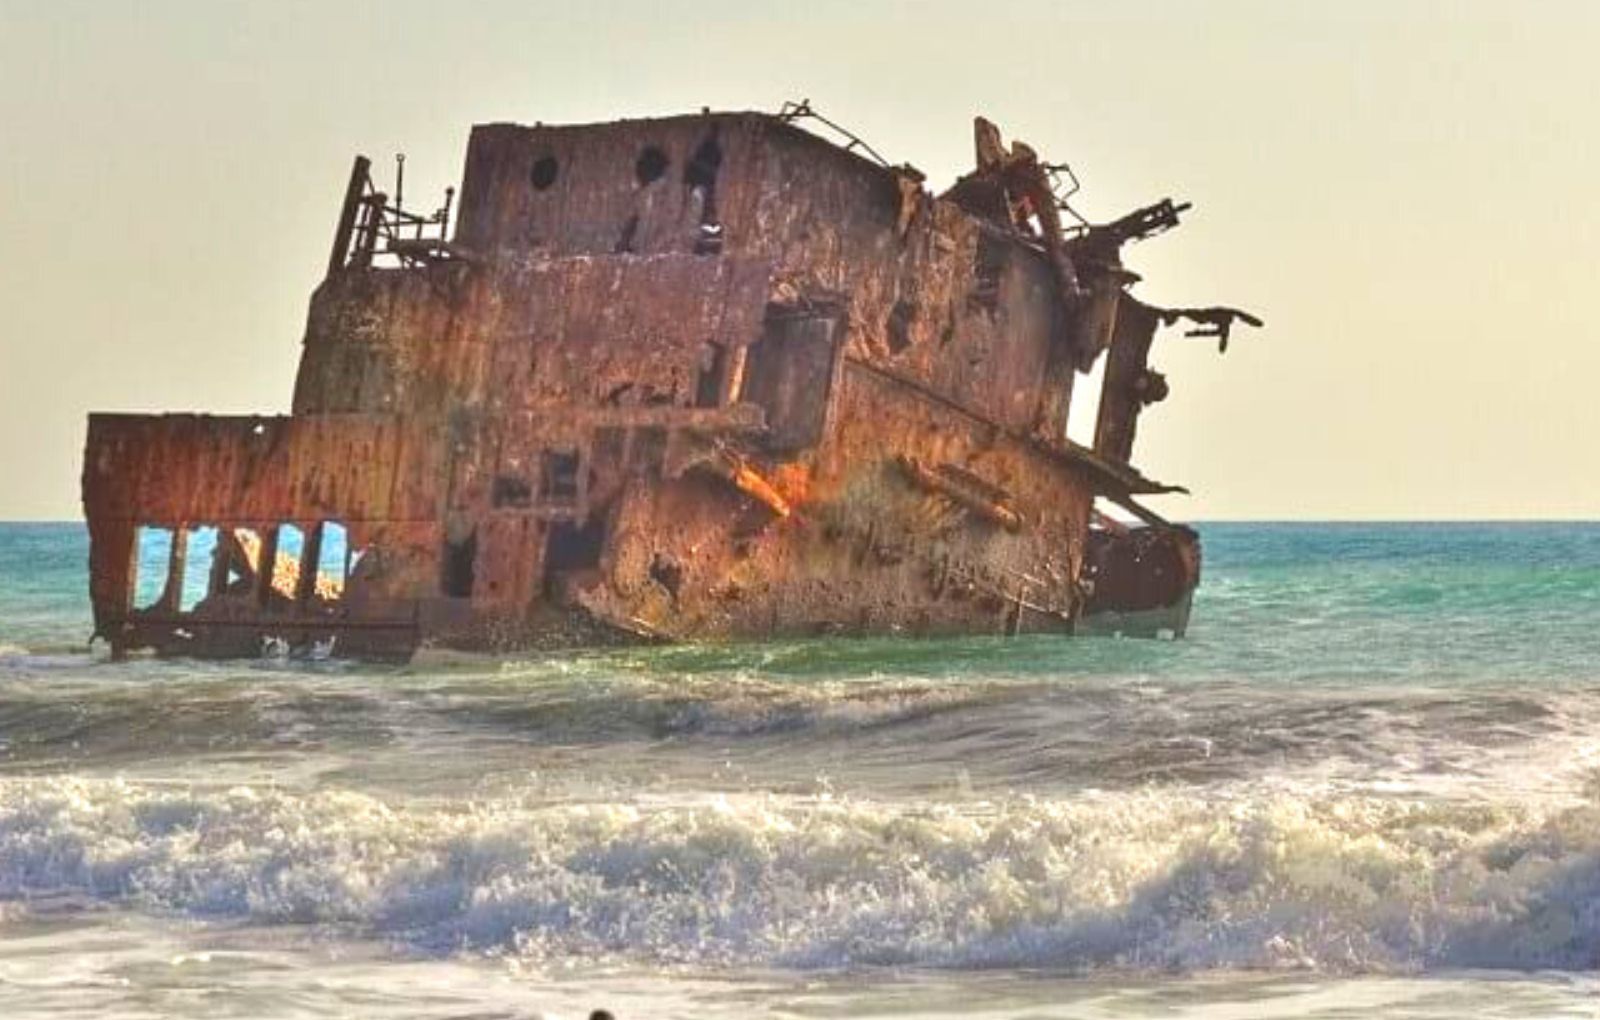 The Three Stars Wrecking Diving Site Limassol Cyprus